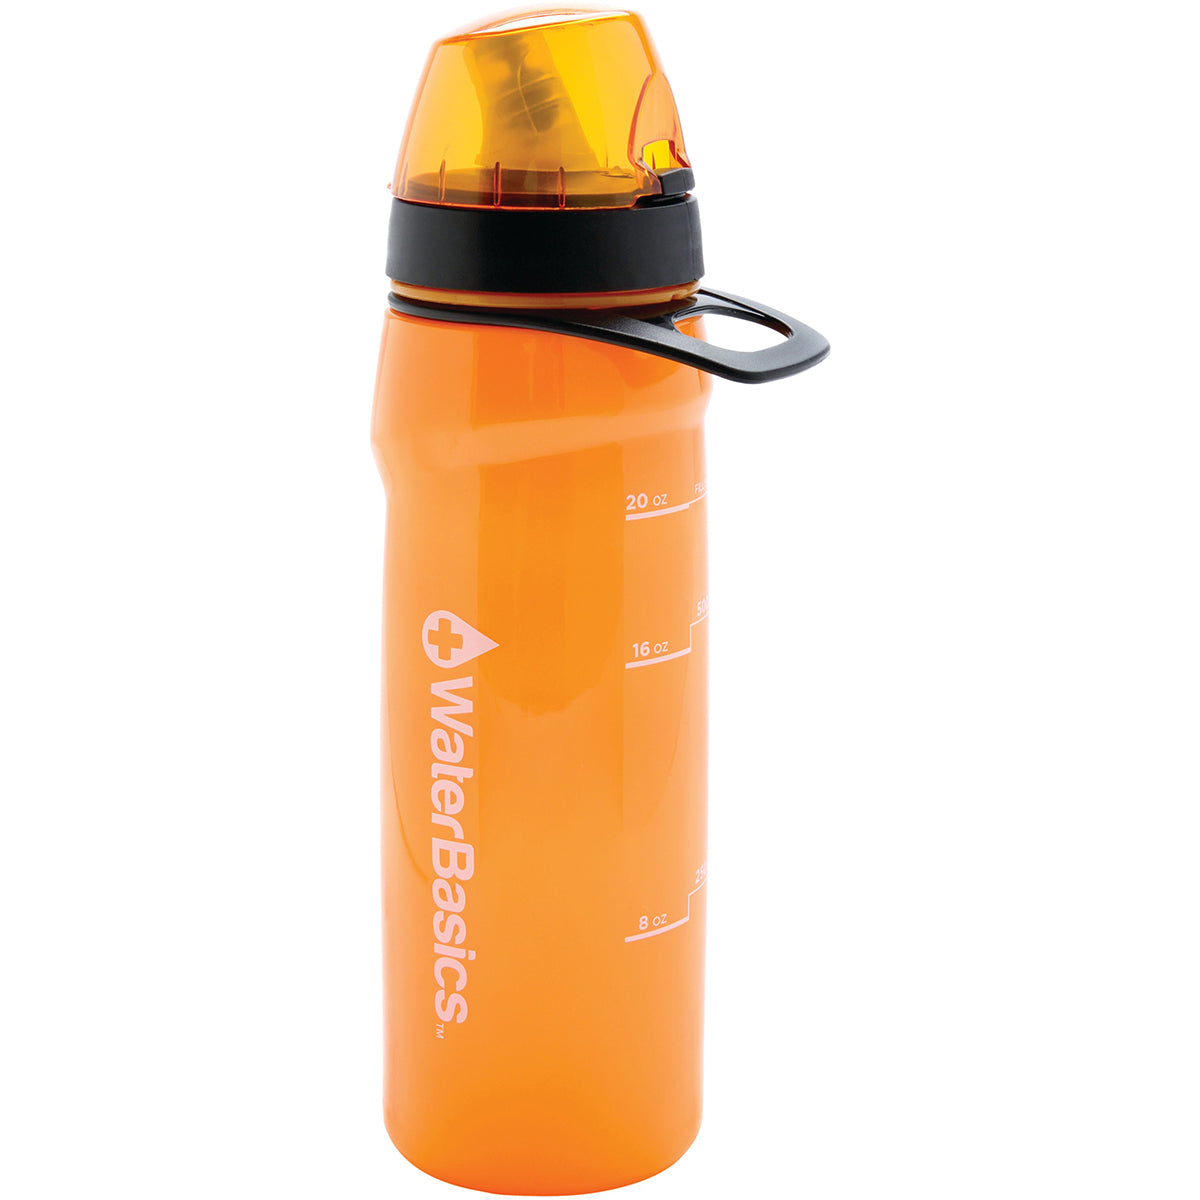 WaterBasics 22 oz. RED Line Emergency Filter Water Bottle with Extra Filter Aquamira